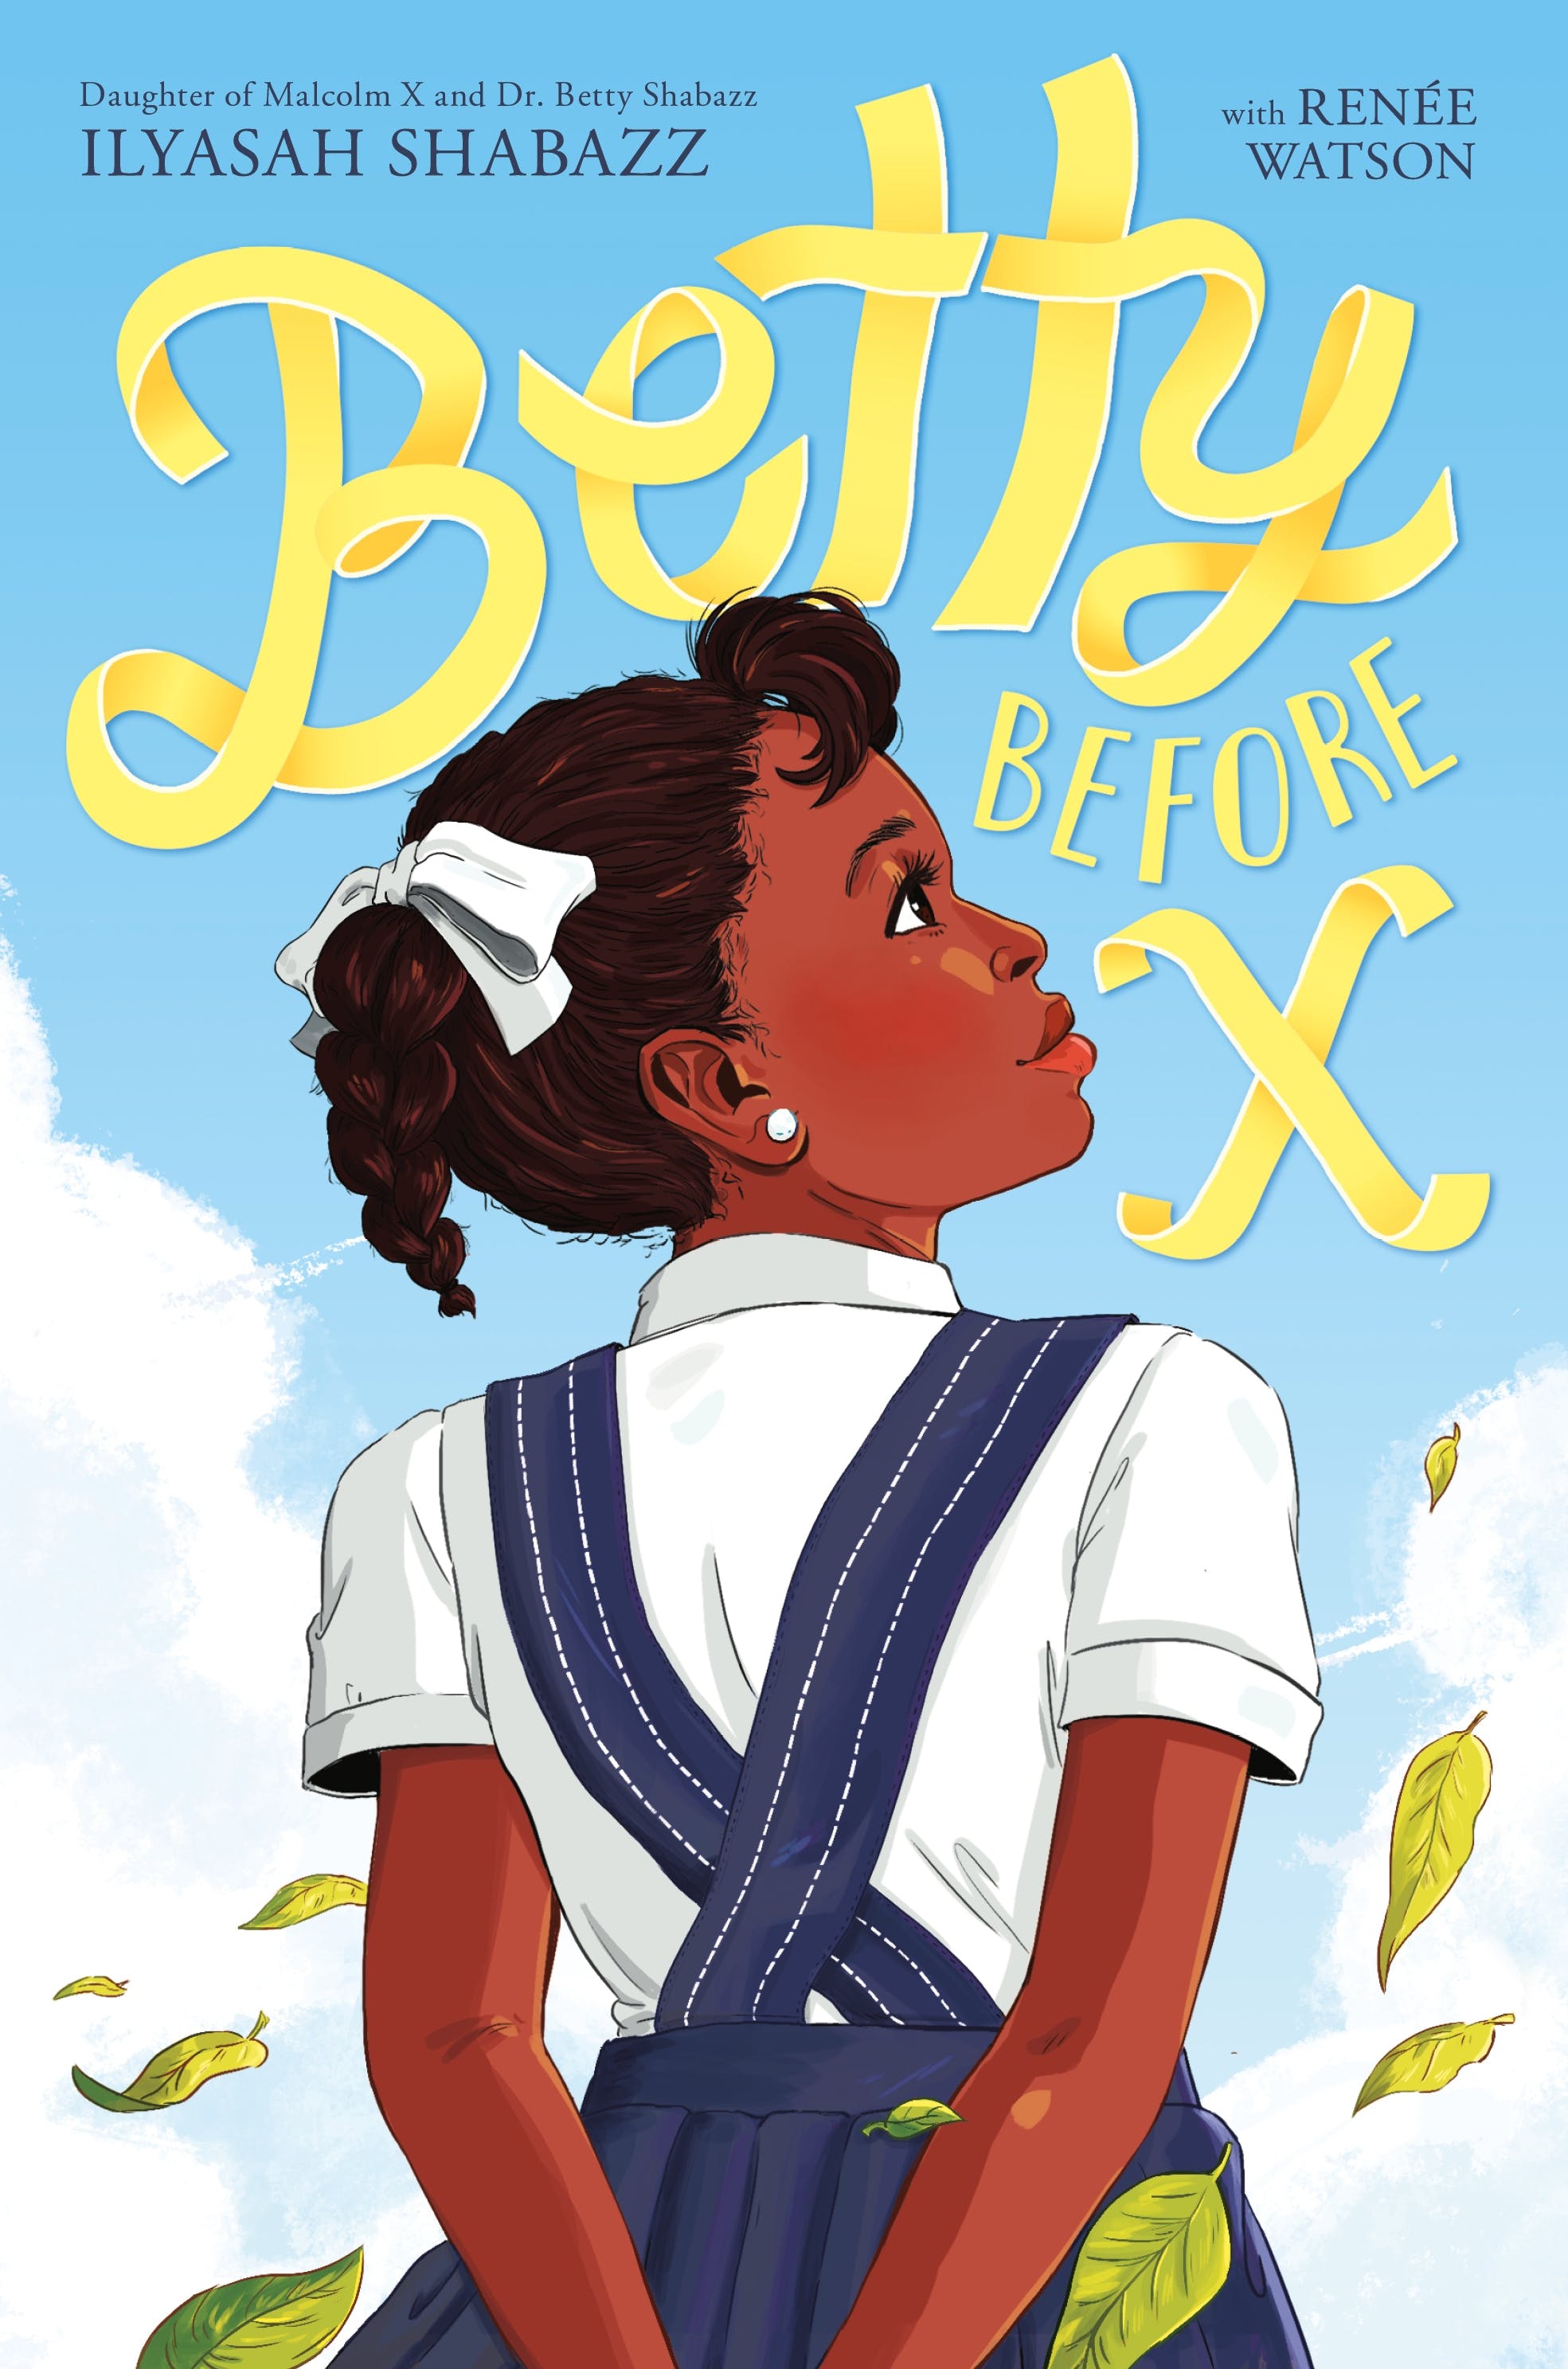 Cover for "Betty Before X"